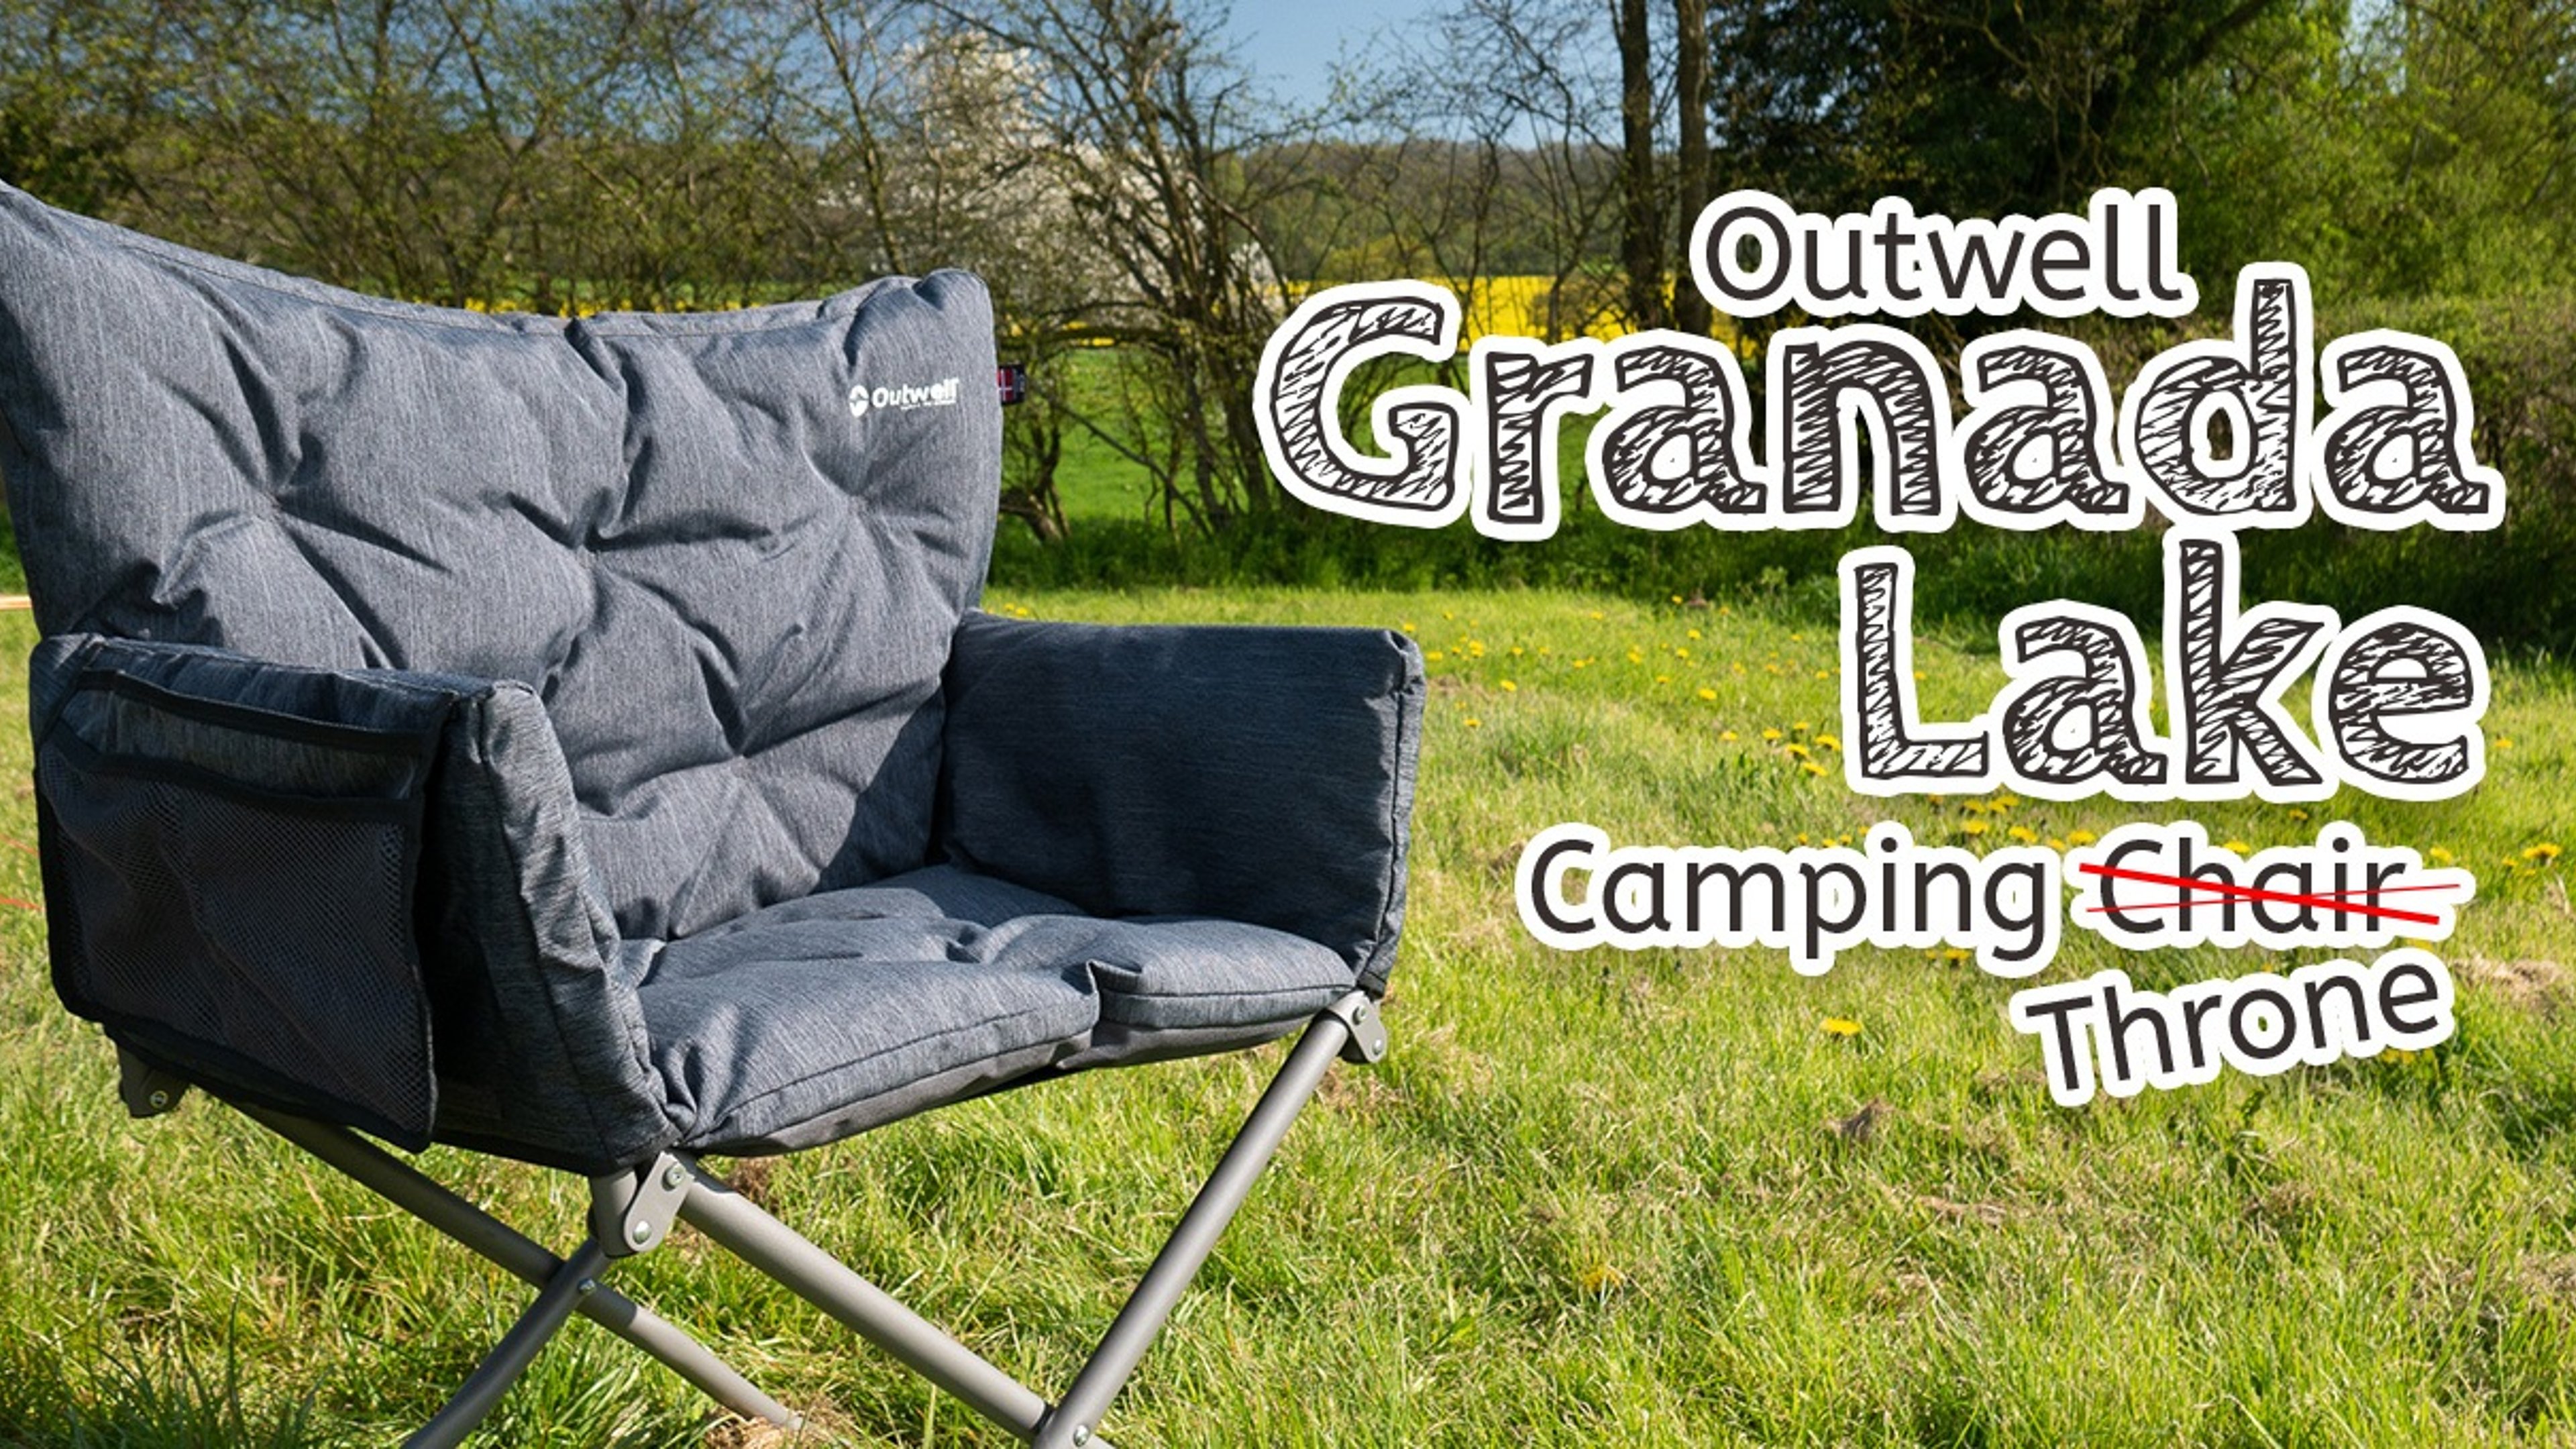 Outwell Grenanda Lake Chair